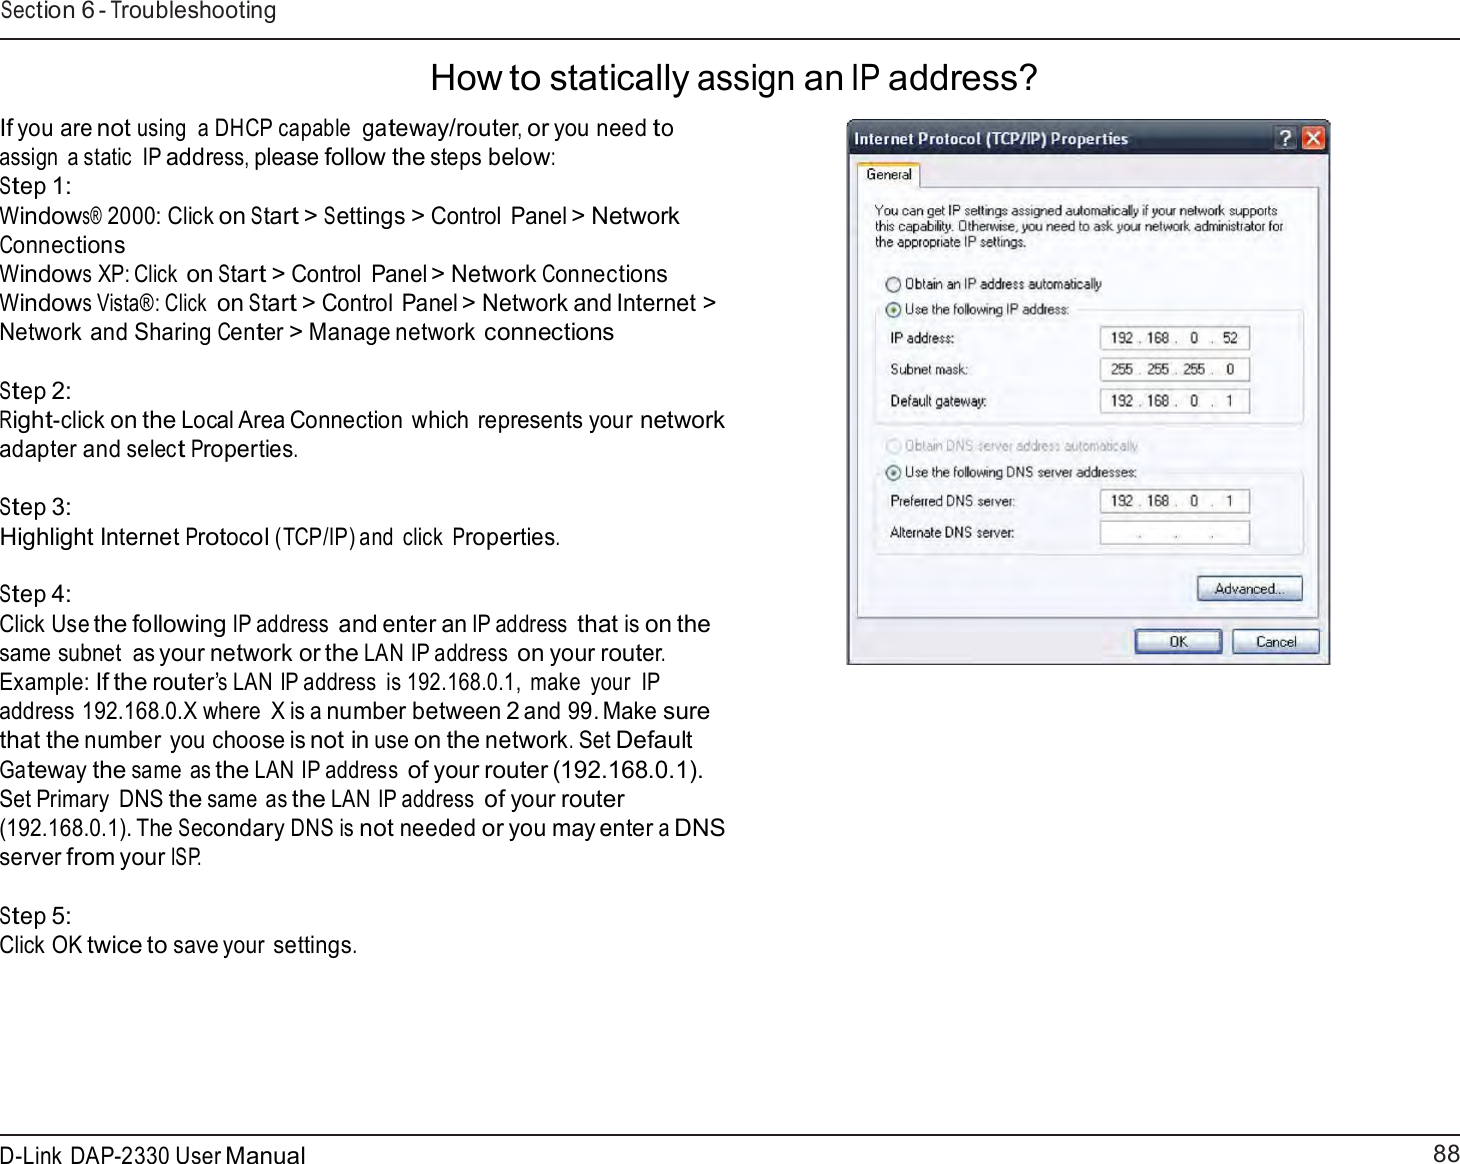 88 D-Link DAP-2330 User ManualSection 6 - Troubleshooting    How to statically assign an IP address?  If you are not using  a DHCP capable gateway/router, or you need to assign  a static  IP address, please follow the steps below: Step 1: Windows® 2000: Click on Start &gt; Settings &gt; Control Panel &gt; Network Connections Windows XP: Click on Start &gt; Control Panel &gt; Network Connections Windows Vista®: Click on Start &gt; Control Panel &gt; Network and Internet &gt; Network and Sharing Center &gt; Manage network connections  Step 2: Right-click on the Local Area Connection which represents your network adapter and select Properties.  Step 3: Highlight Internet Protocol (TCP/IP) and  click Properties.   Step 4: Click Use the following IP address and enter an IP address that is on the same subnet  as your network or the LAN IP address on your router. Example: If the router’s LAN IP address  is 192.168.0.1,  make  your  IP address 192.168.0.X where  X is a number between 2 and 99. Make sure that the number you choose is not in use on the network. Set Default Gateway the same as the LAN IP address of your router (192.168.0.1). Set Primary  DNS the same as the LAN IP address of your router (192.168.0.1). The Secondary DNS is not needed or you may enter a DNS server from your ISP.   Step 5: Click OK twice to save your settings. 